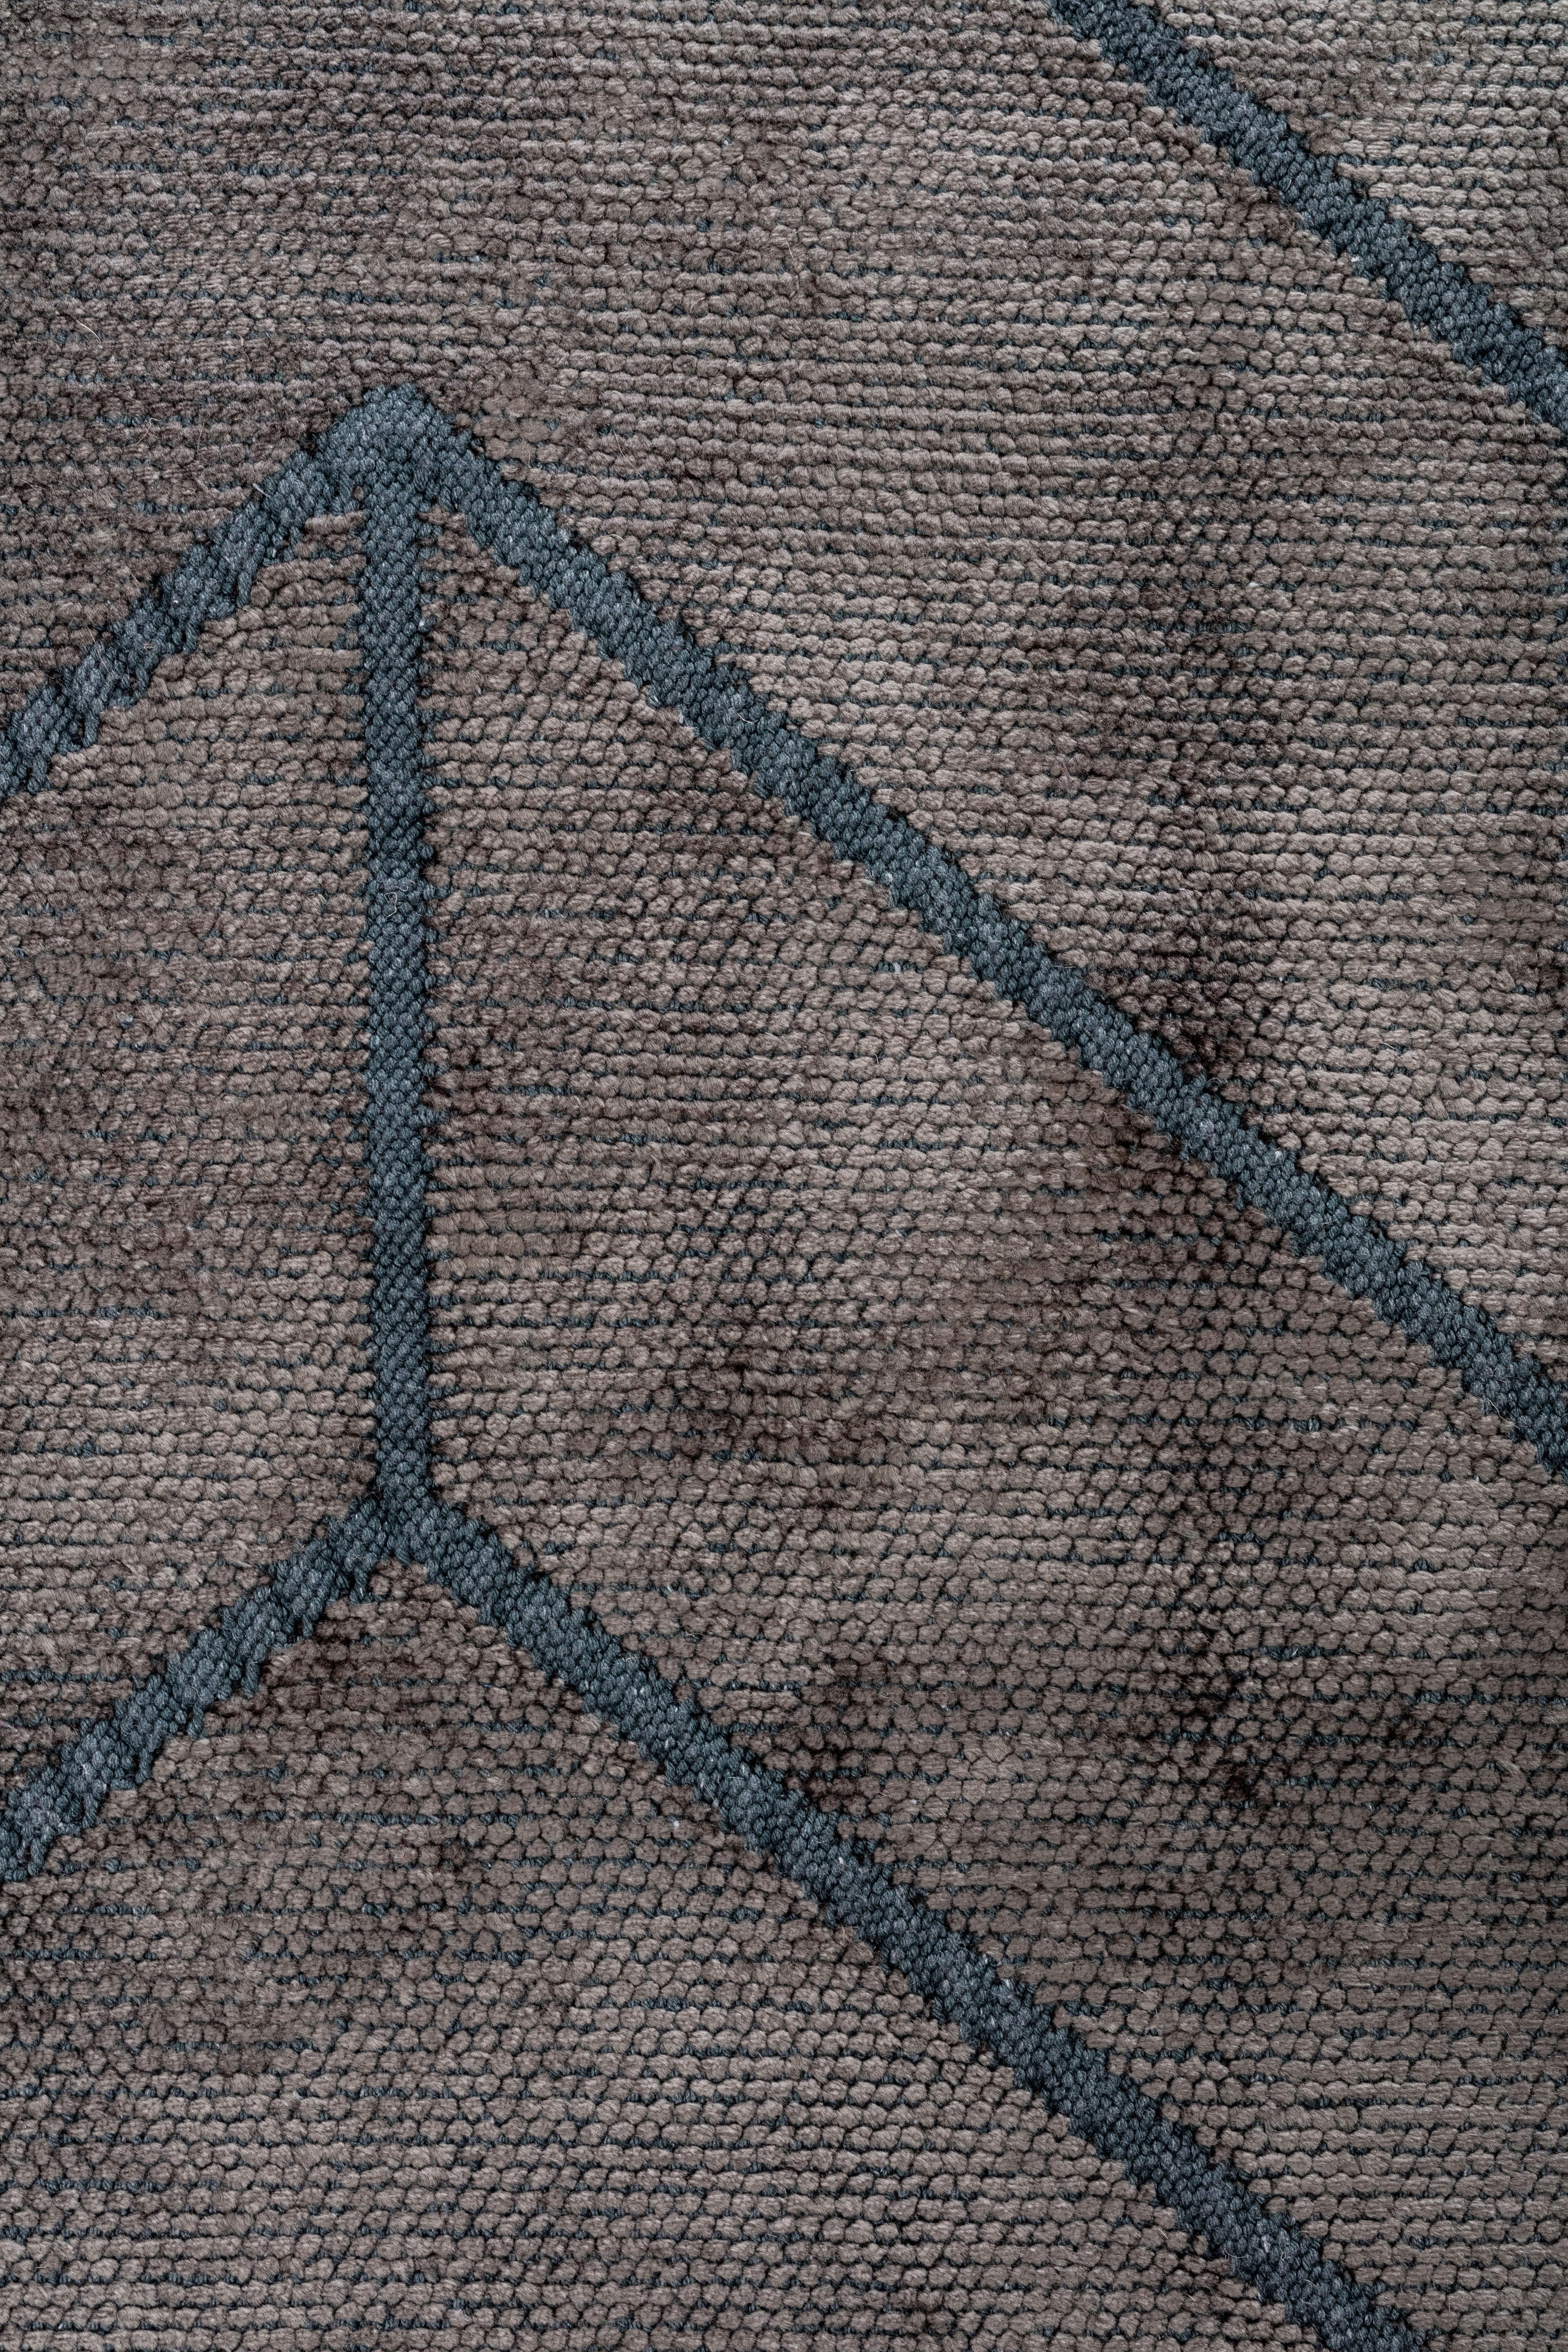 Machine-Made Modern Chevron Dark Brown and Charcoal Chenille Area Rug Ready to Ship For Sale